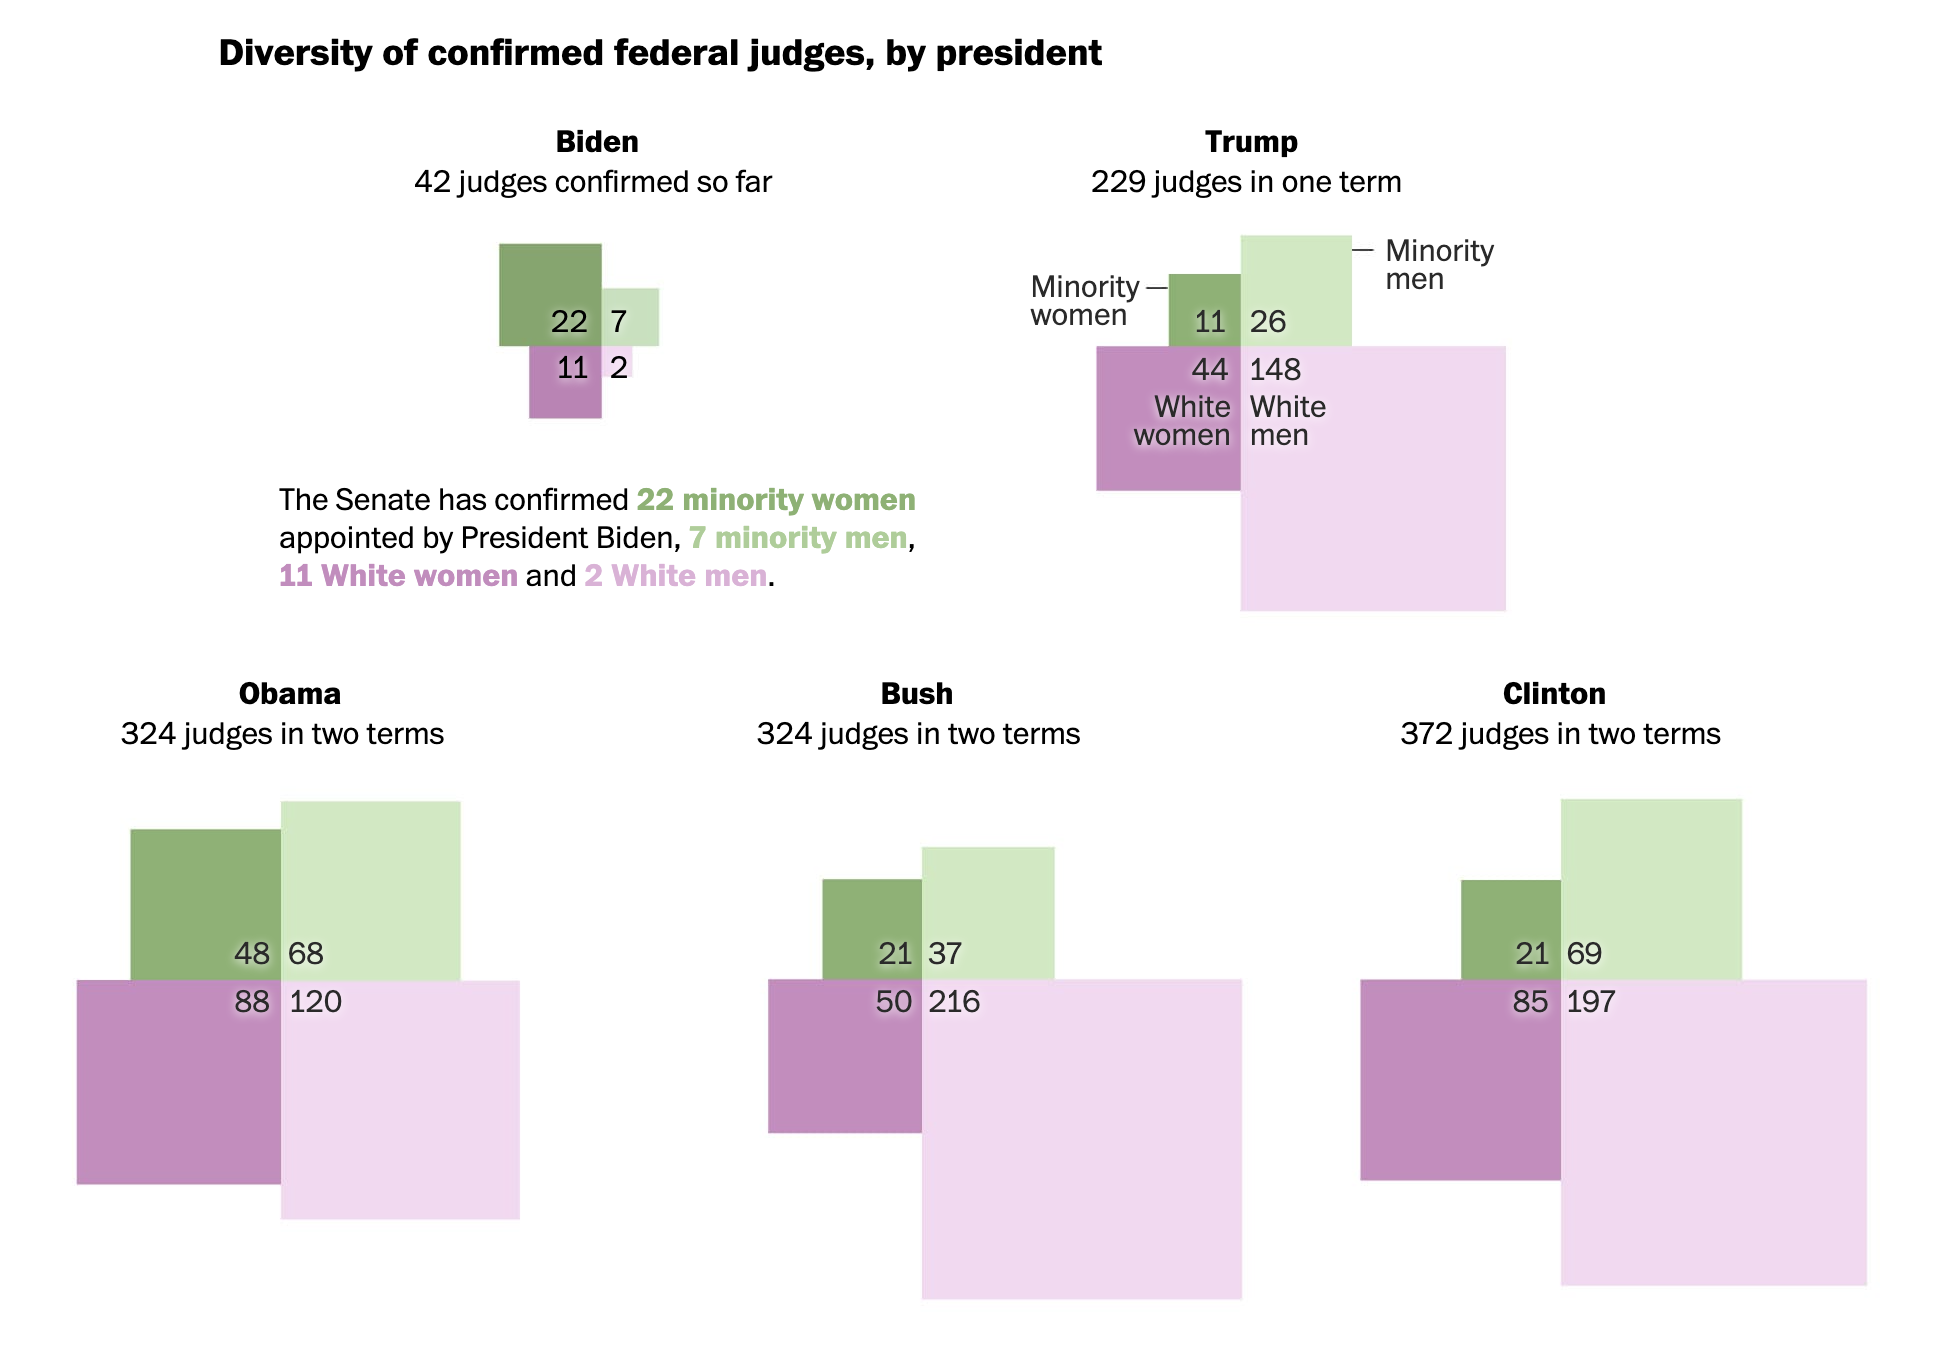 A visualisation showing the diversity of federal judges ba different US presidents. The visual uses subtle halos to make the numbers on the chart stand out a little from their background